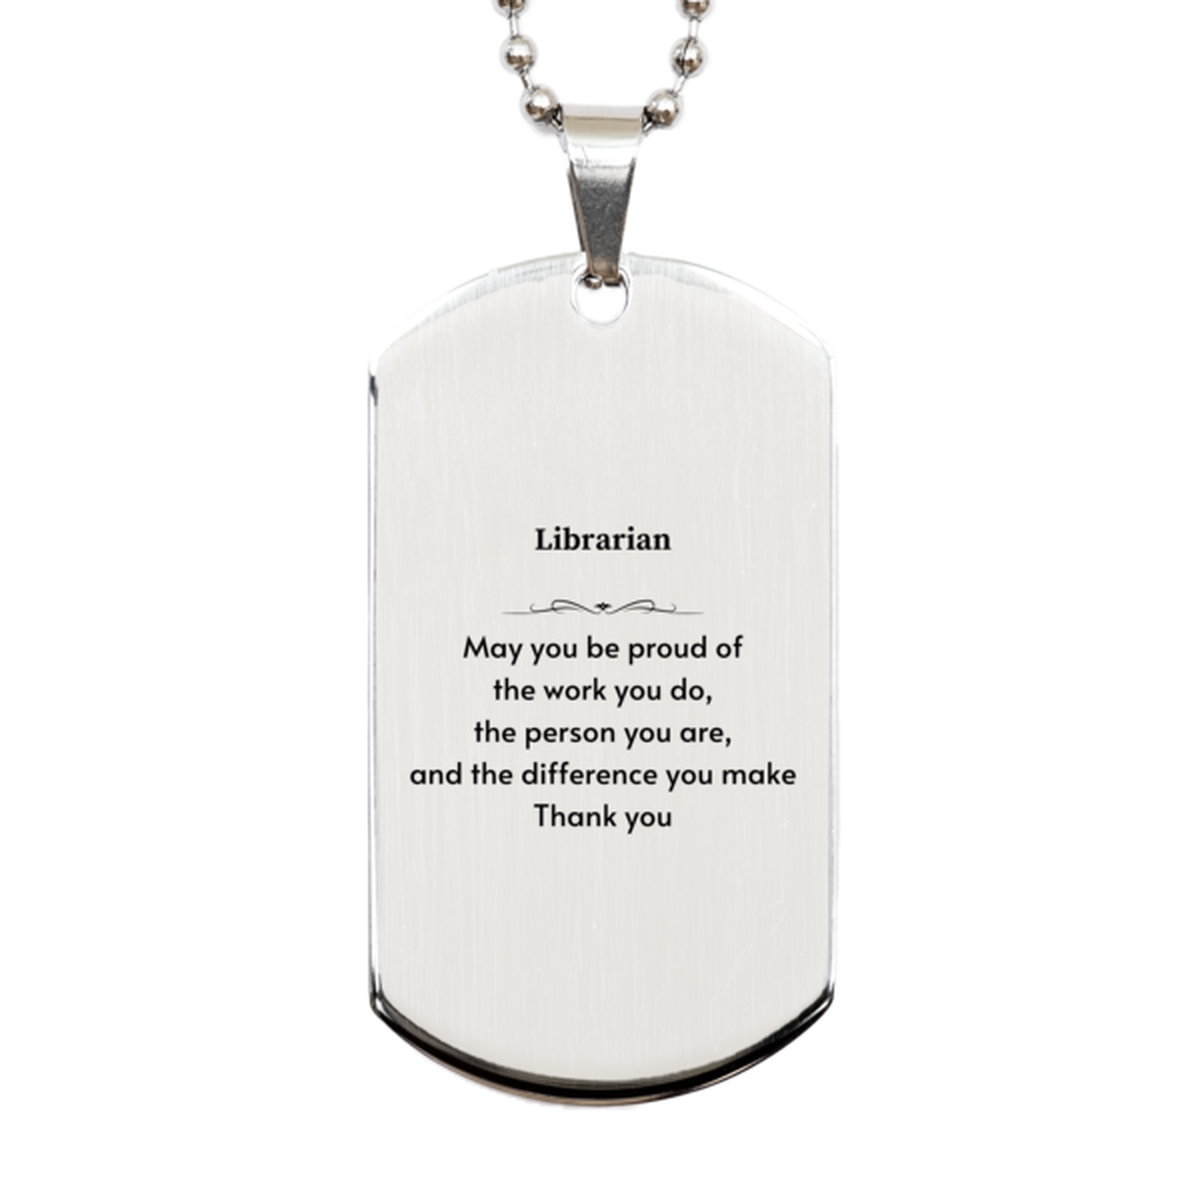 Heartwarming Silver Dog Tag Retirement Coworkers Gifts for Librarian, Librarian May You be proud of the work you do, the person you are Gifts for Boss Men Women Friends